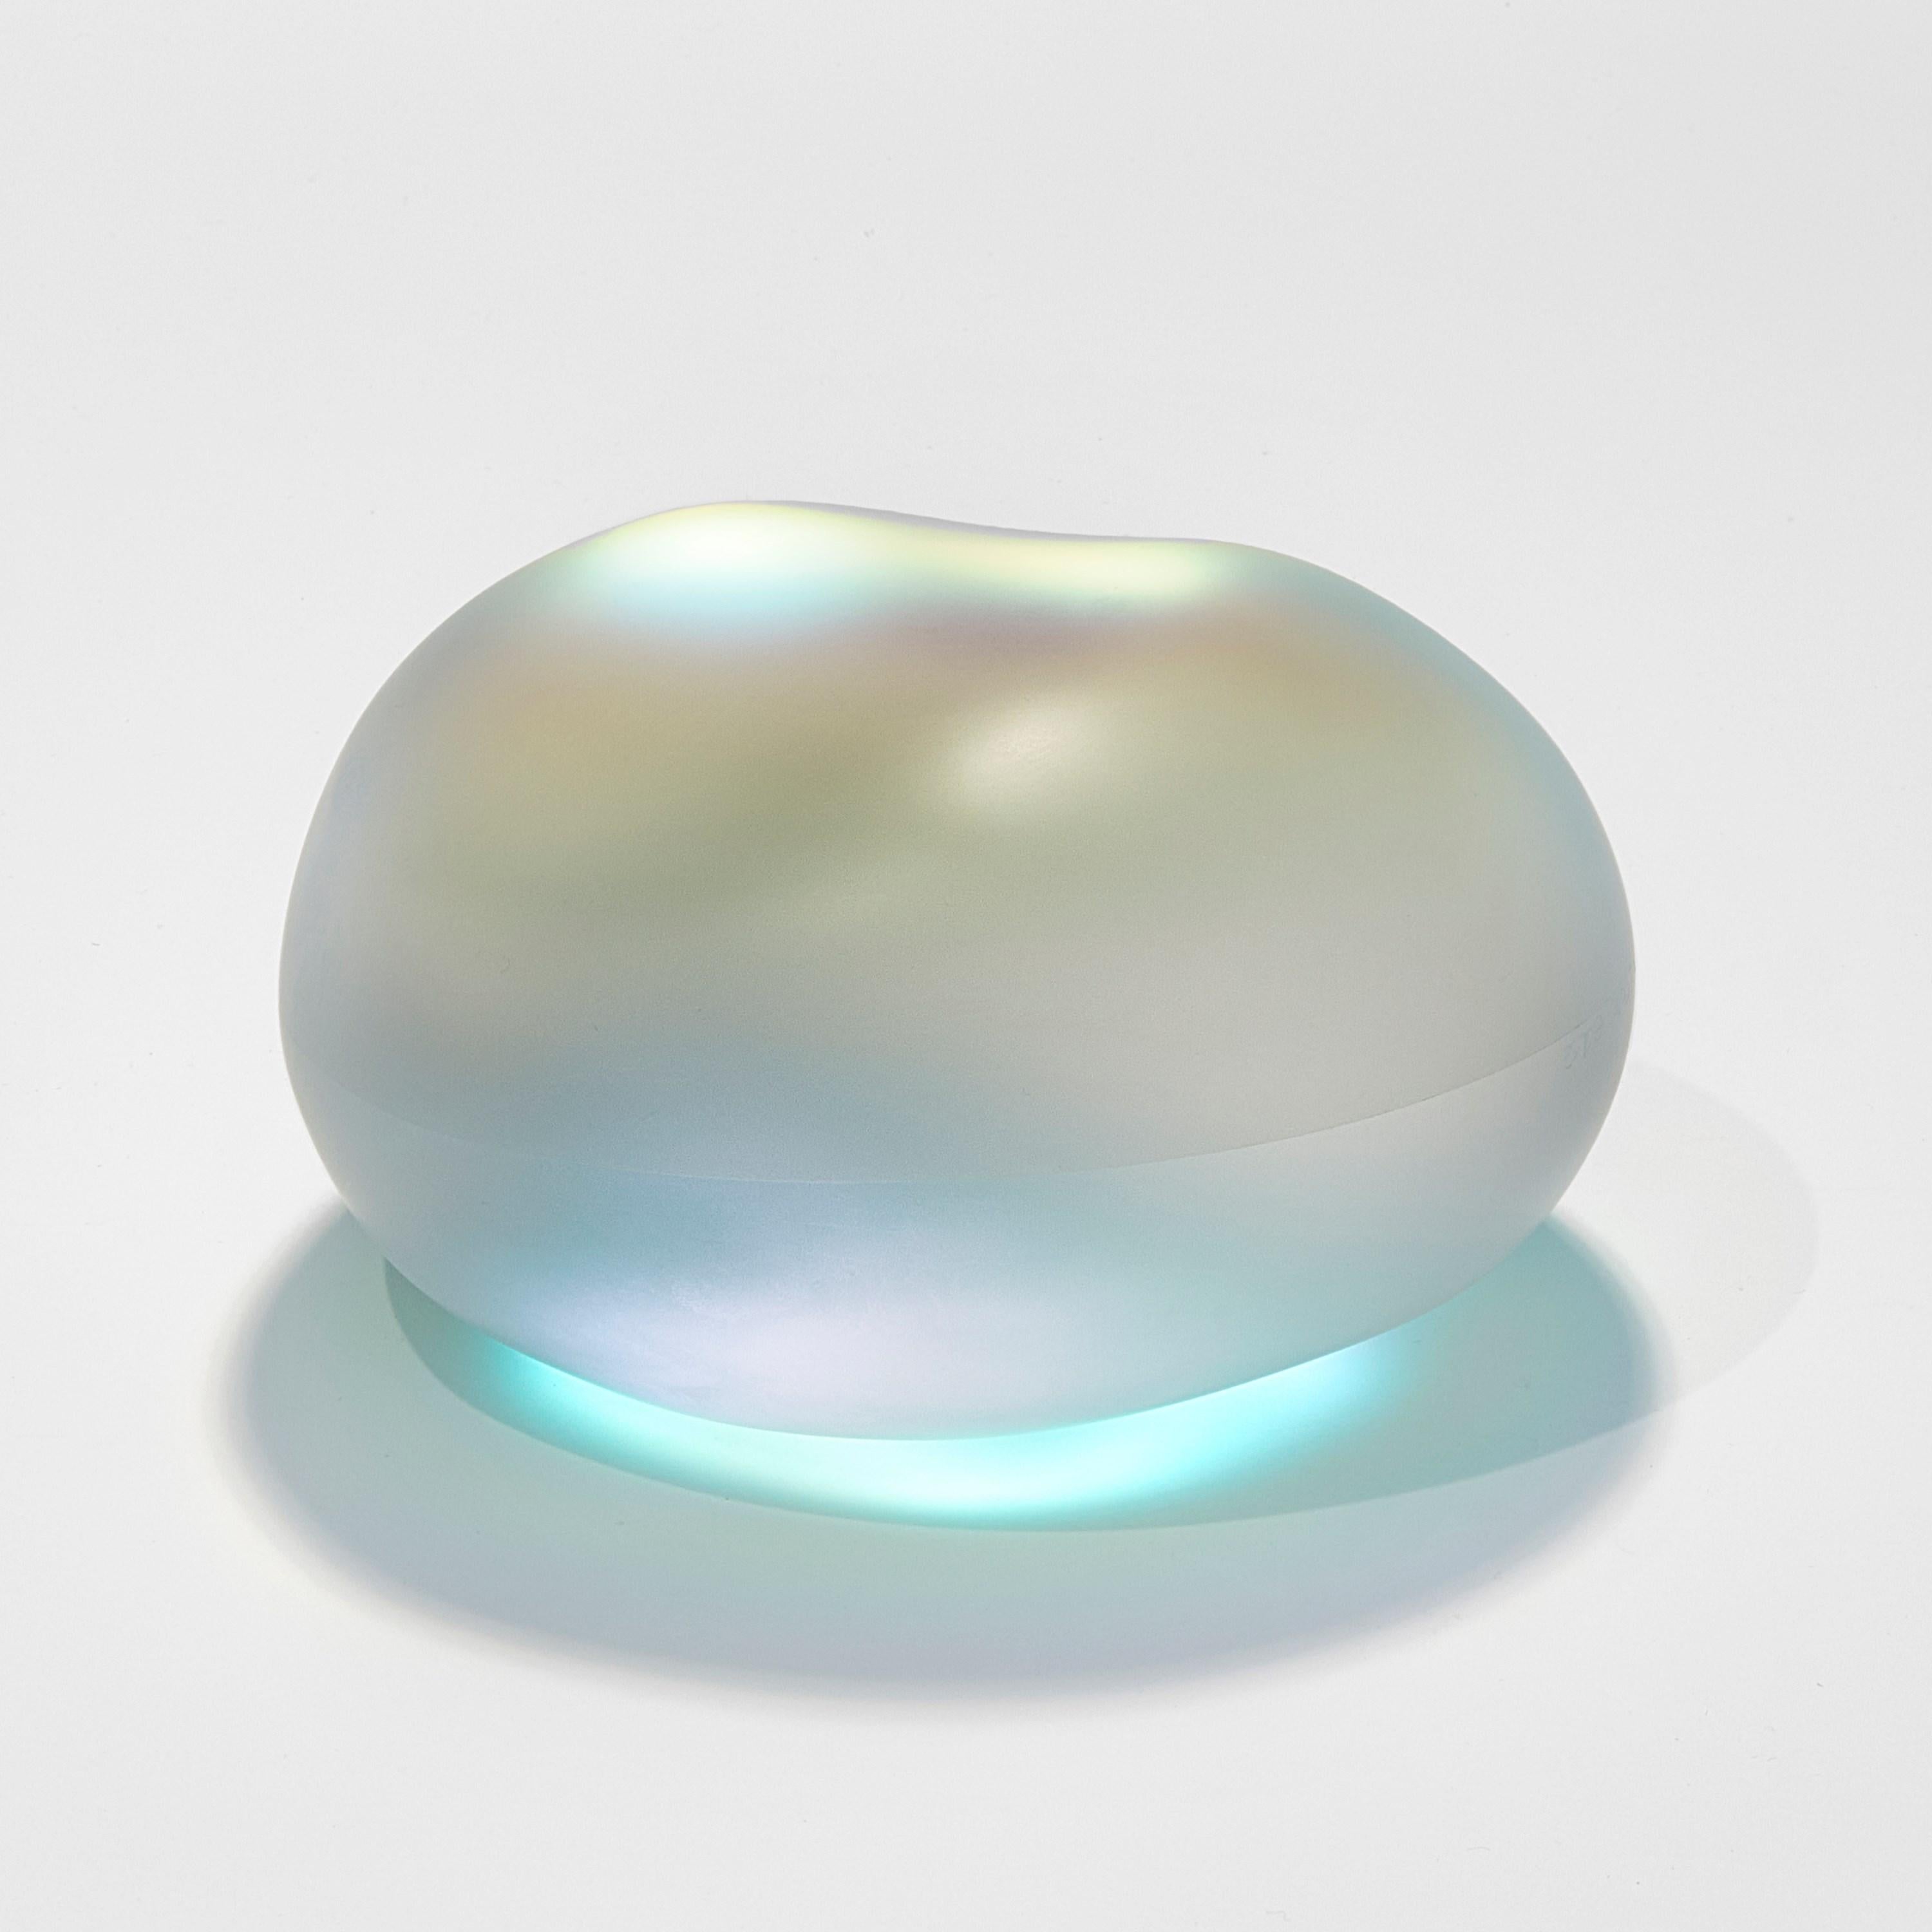 Organic Modern Moon-rock 012, glass sculptural rock/pebble with iridescent colours by Jon Lewis